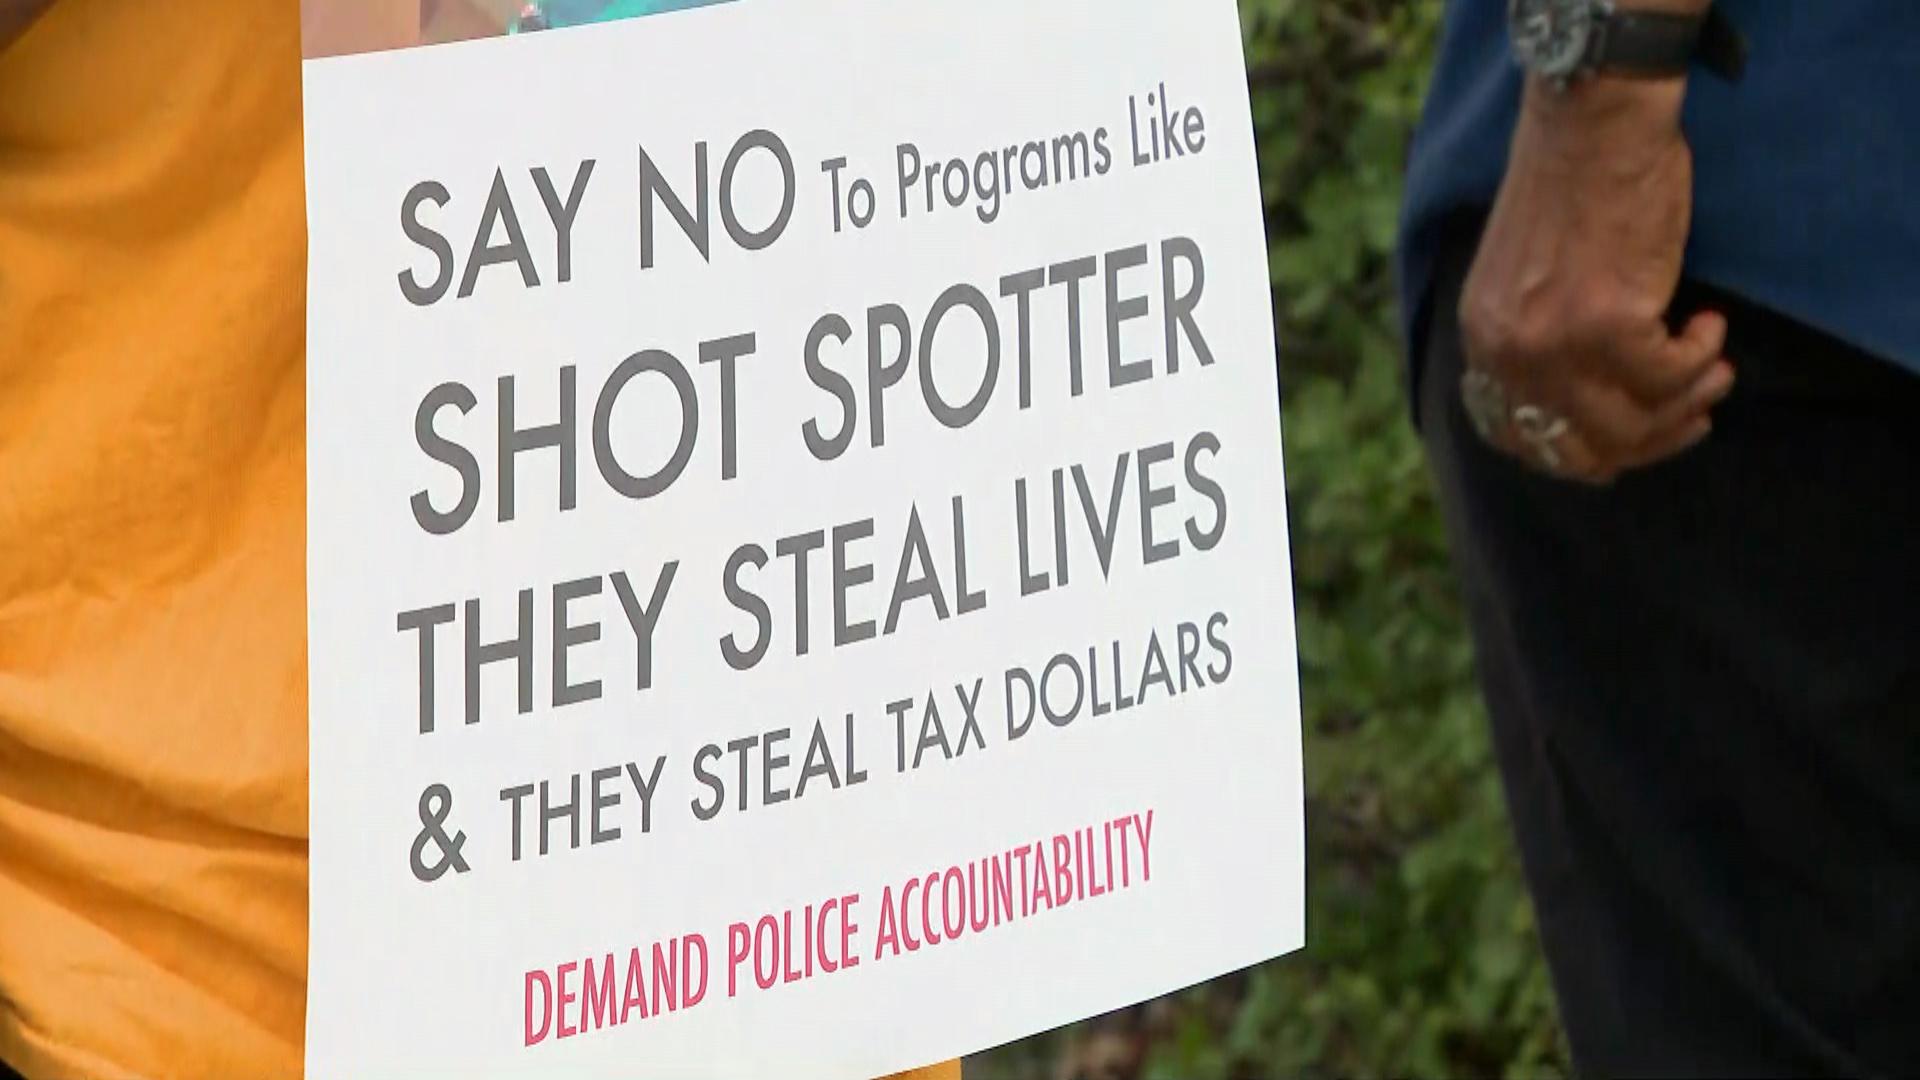 Activists called on Chicago to drop its contract with ShotSpotter during a protest on Aug. 19, 2021. (WTTW News)